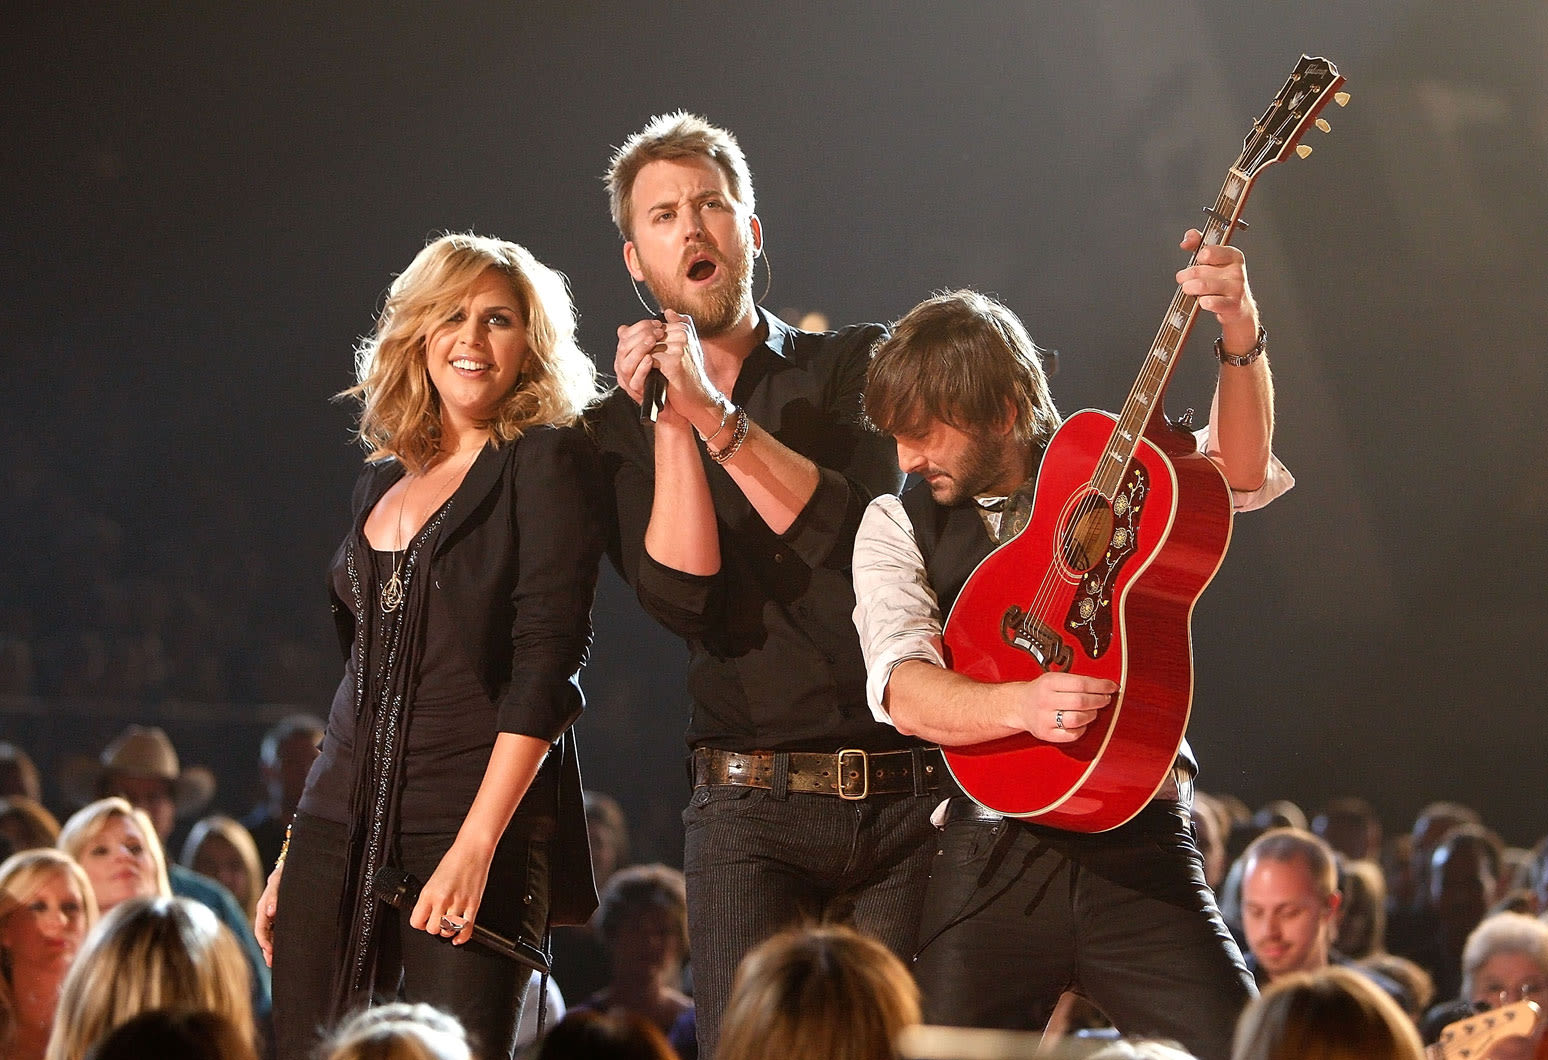 Chart Rewind: In 2009, Lady A Made Its First ‘Run’ to No. 1 on Hot Country Songs